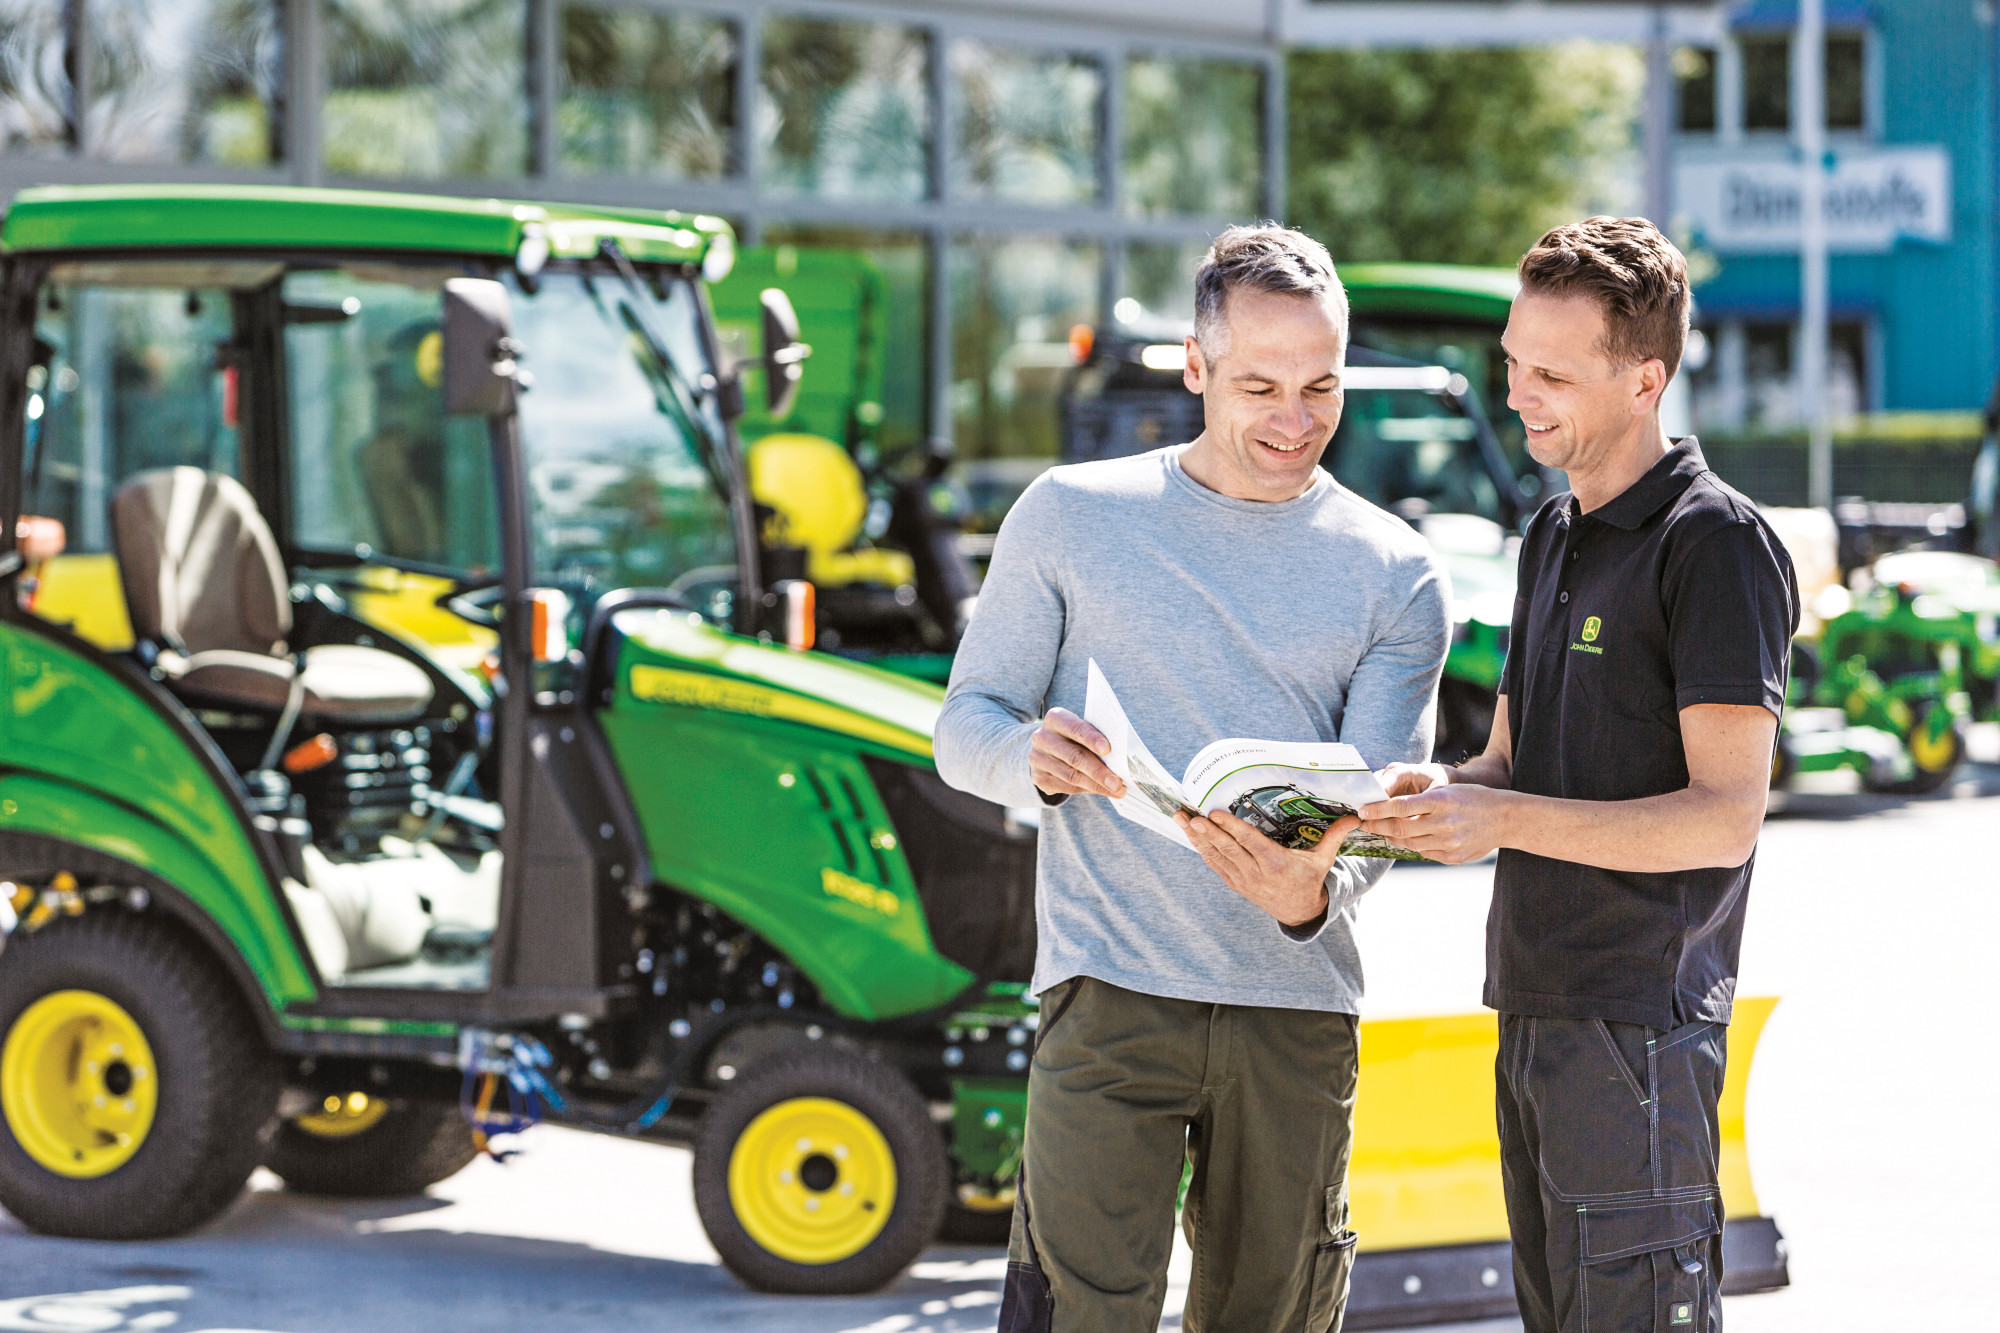 Used Groundcare Machinery for Sale: A Buyers Guide